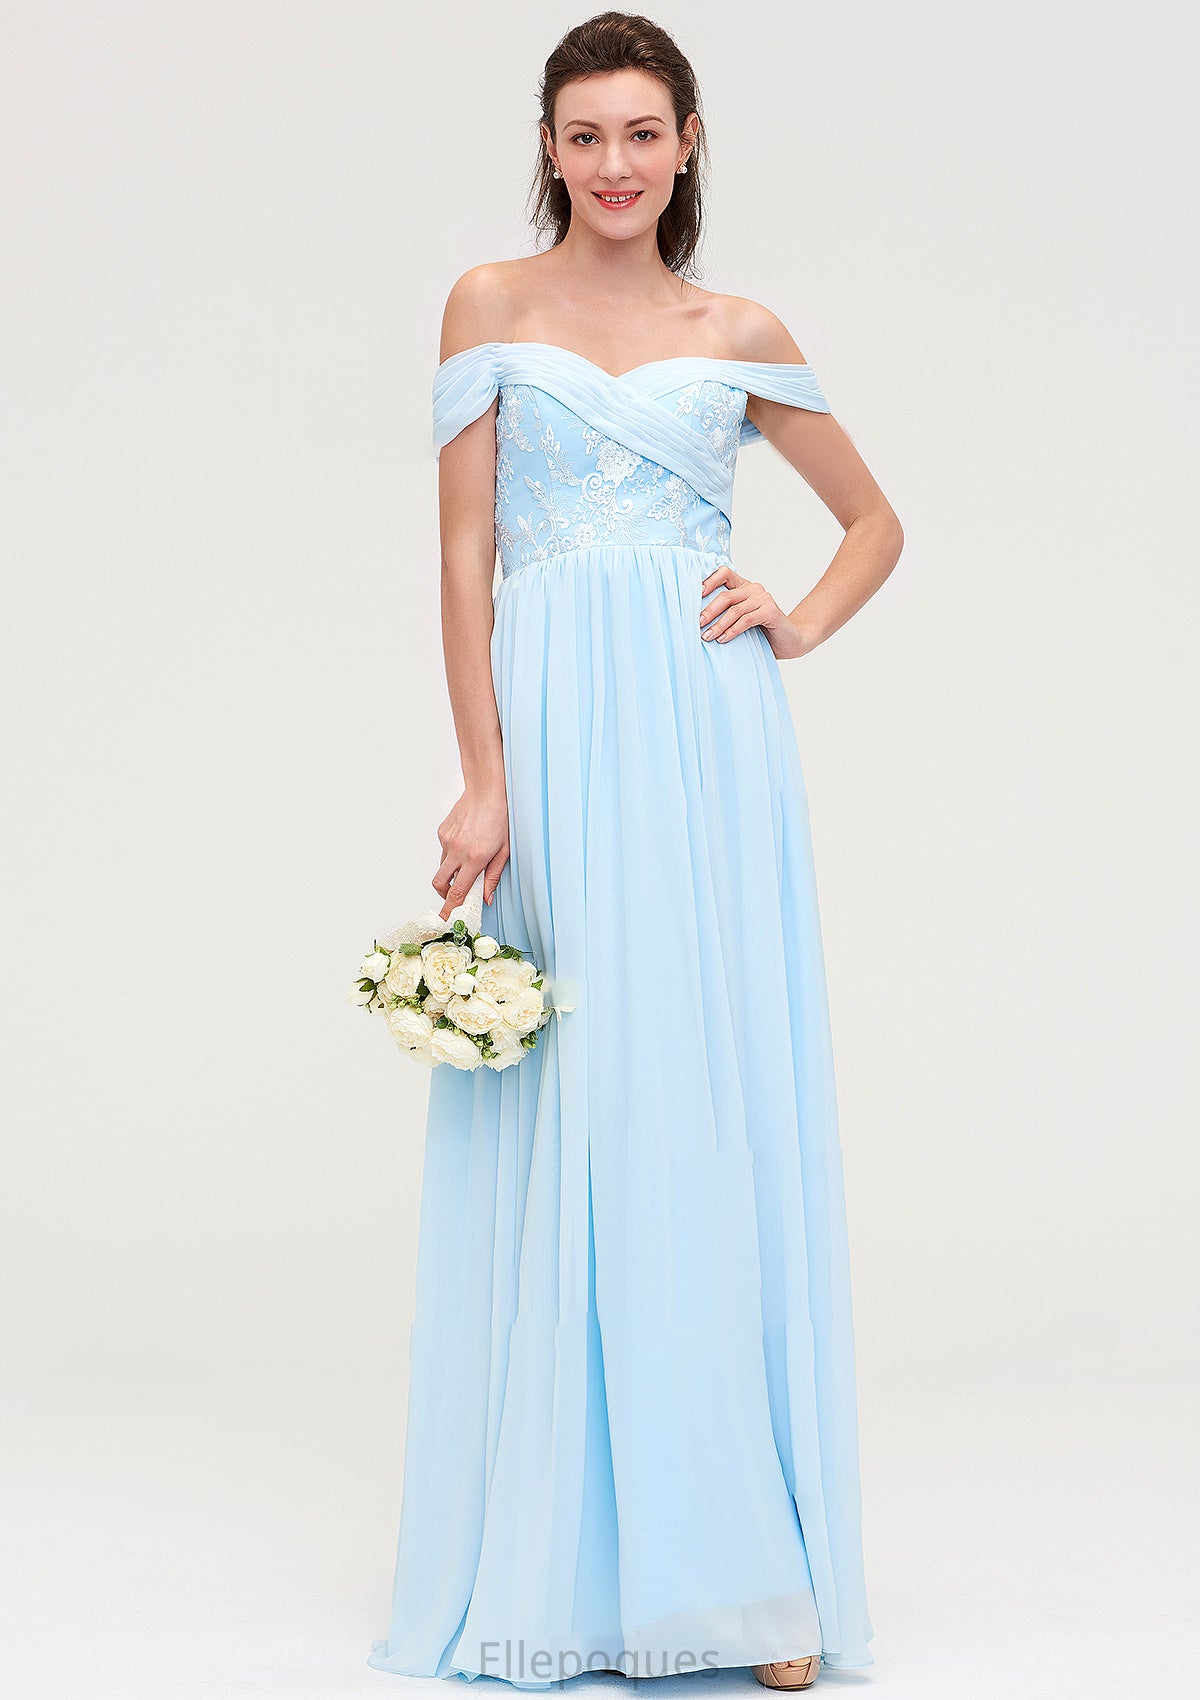 Off-the-Shoulder Sleeveless Chiffon A-line/Princess Long/Floor-Length Bridesmaid Dresseses With Pleated Appliqued Nadia HOP0025431